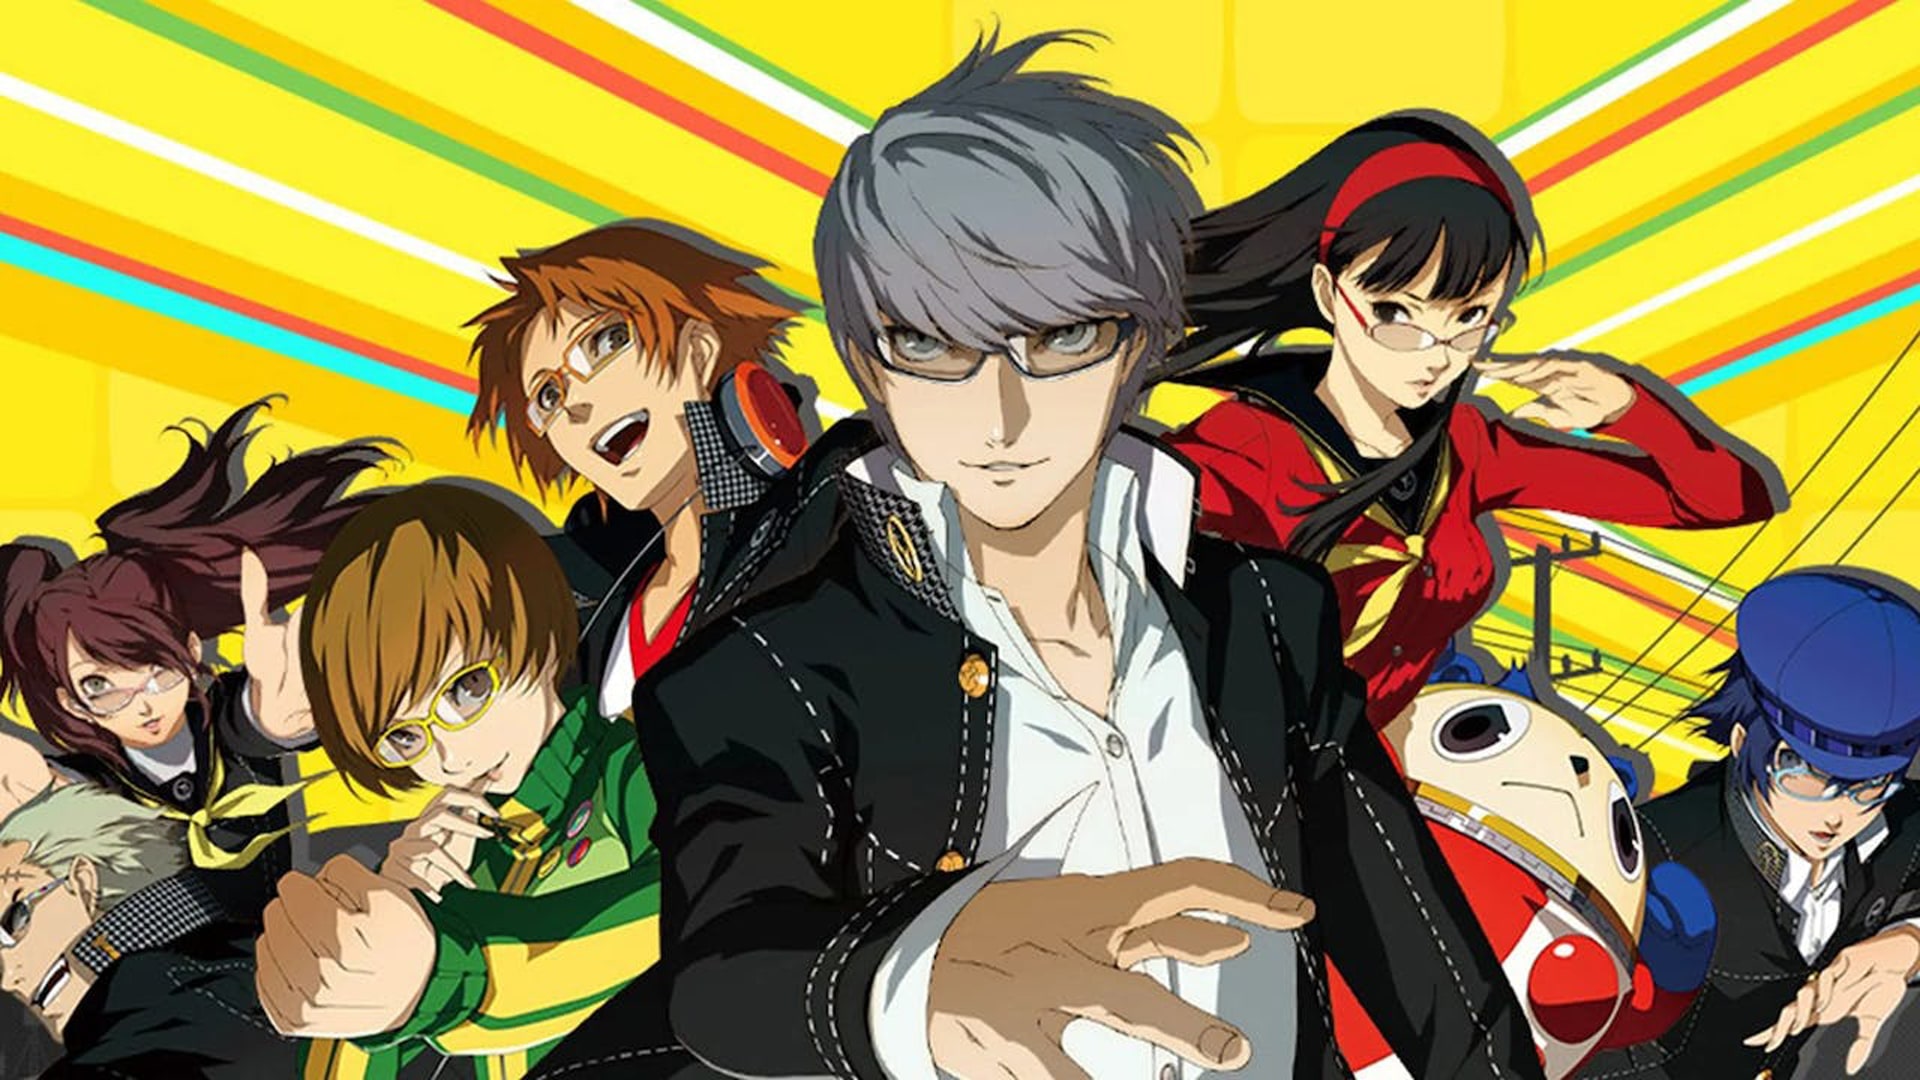 Gameplay screenshot of Persona 4 Golden, showing characters and interface on PC